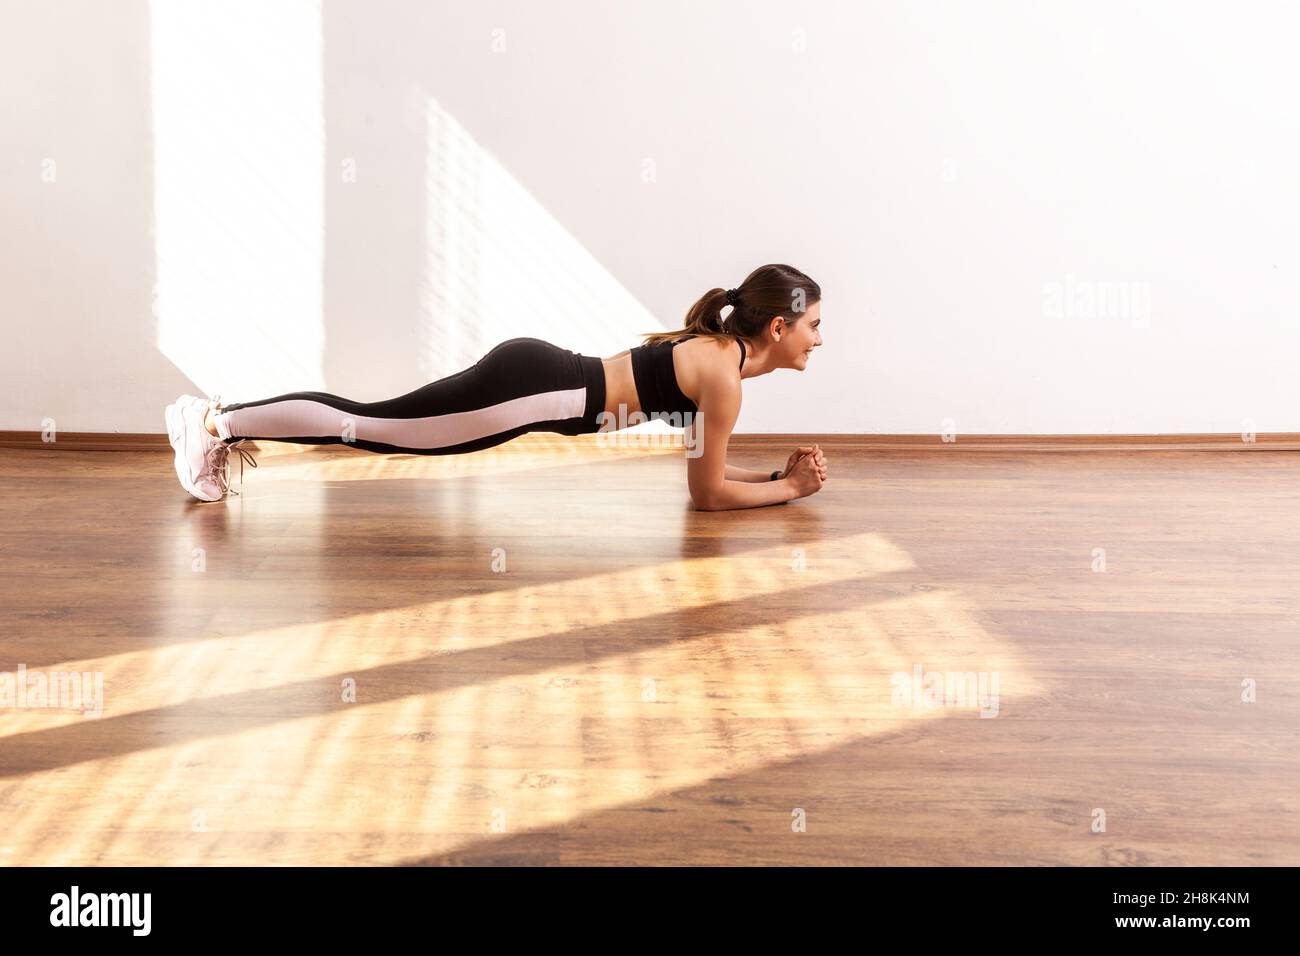 Side view of sportive woman practicing yoga, doing plank exercise on bent hands, training muscles, wearing black sports top and tights. Full length studio shot illuminated by sunlight from window. Stock Photo